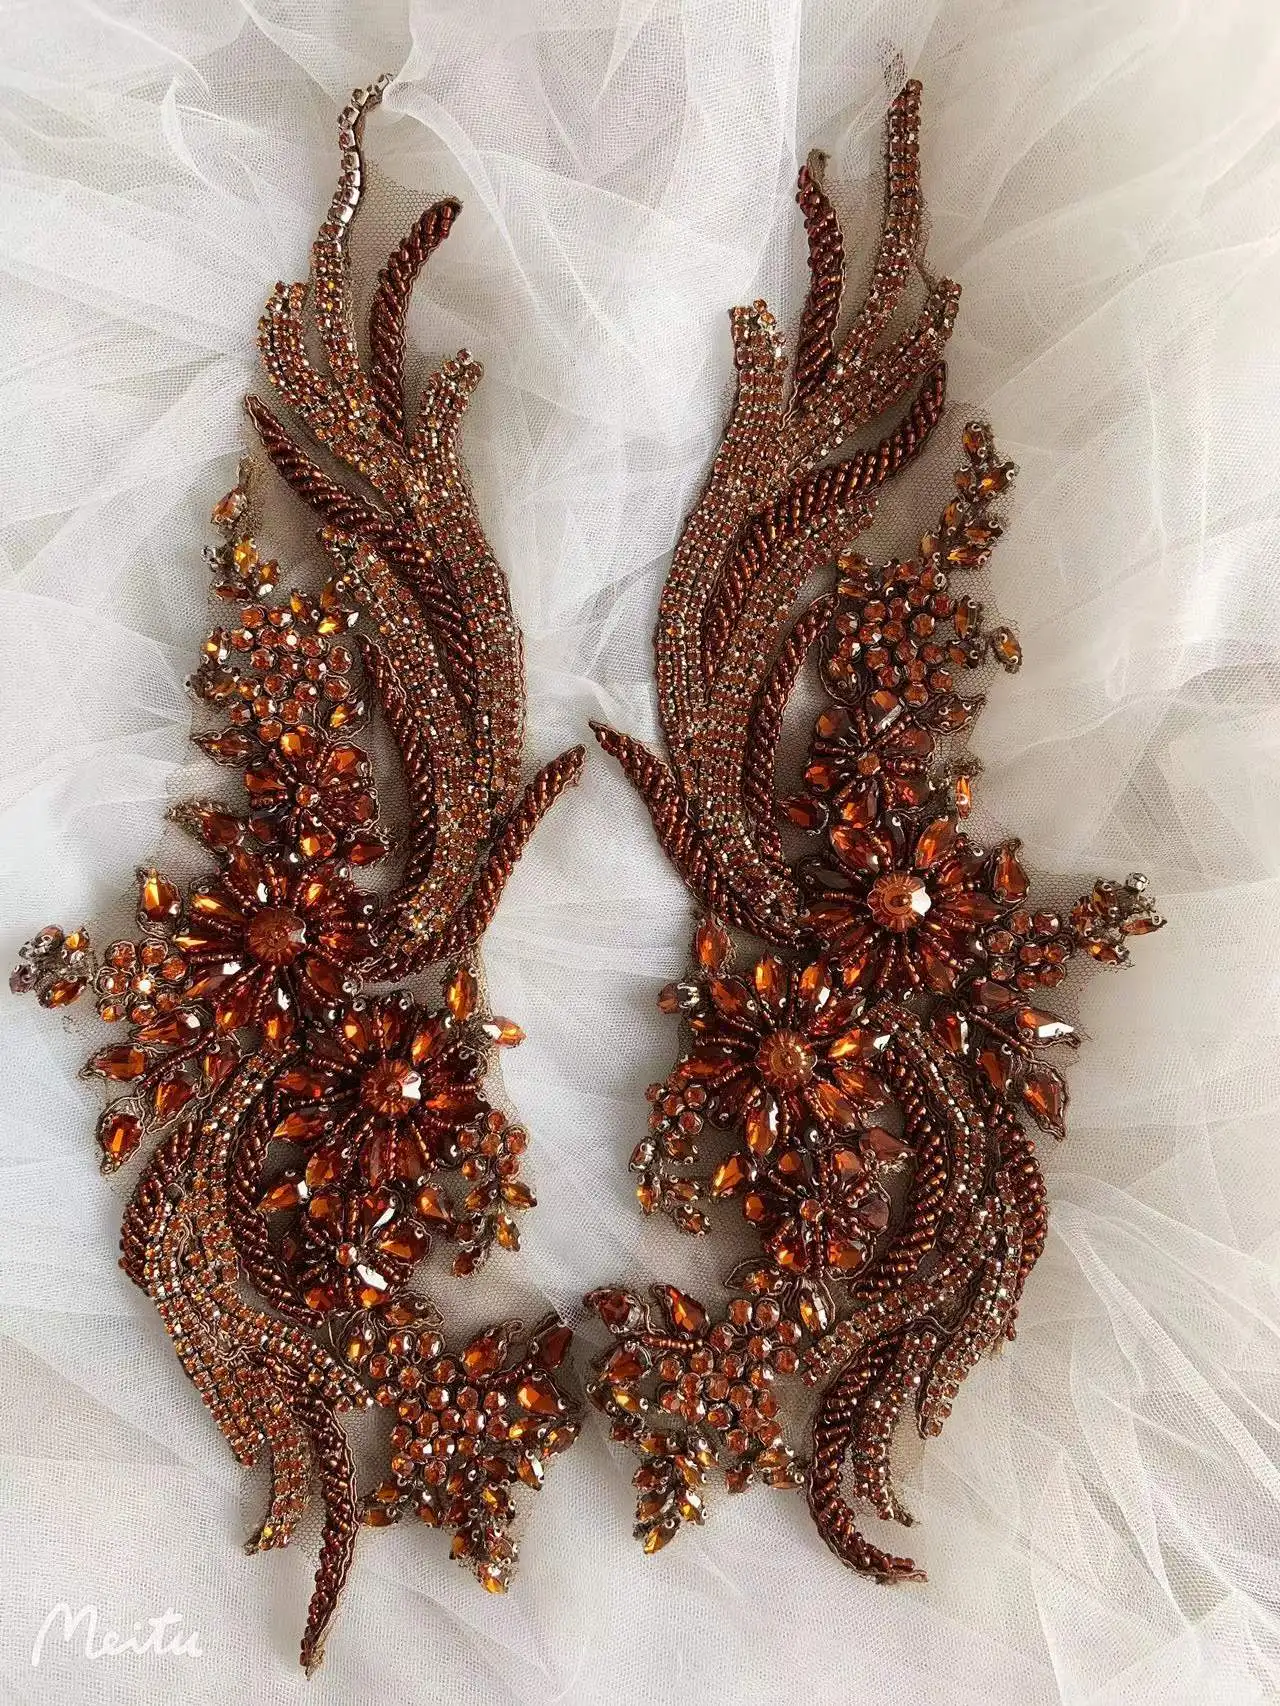 1 Pair Deluxe Brown Rhinestone Crystal Patch Heavy Bead Applique for Colorful Bridal Decor Supplies,Haute Couture,Dance Costume